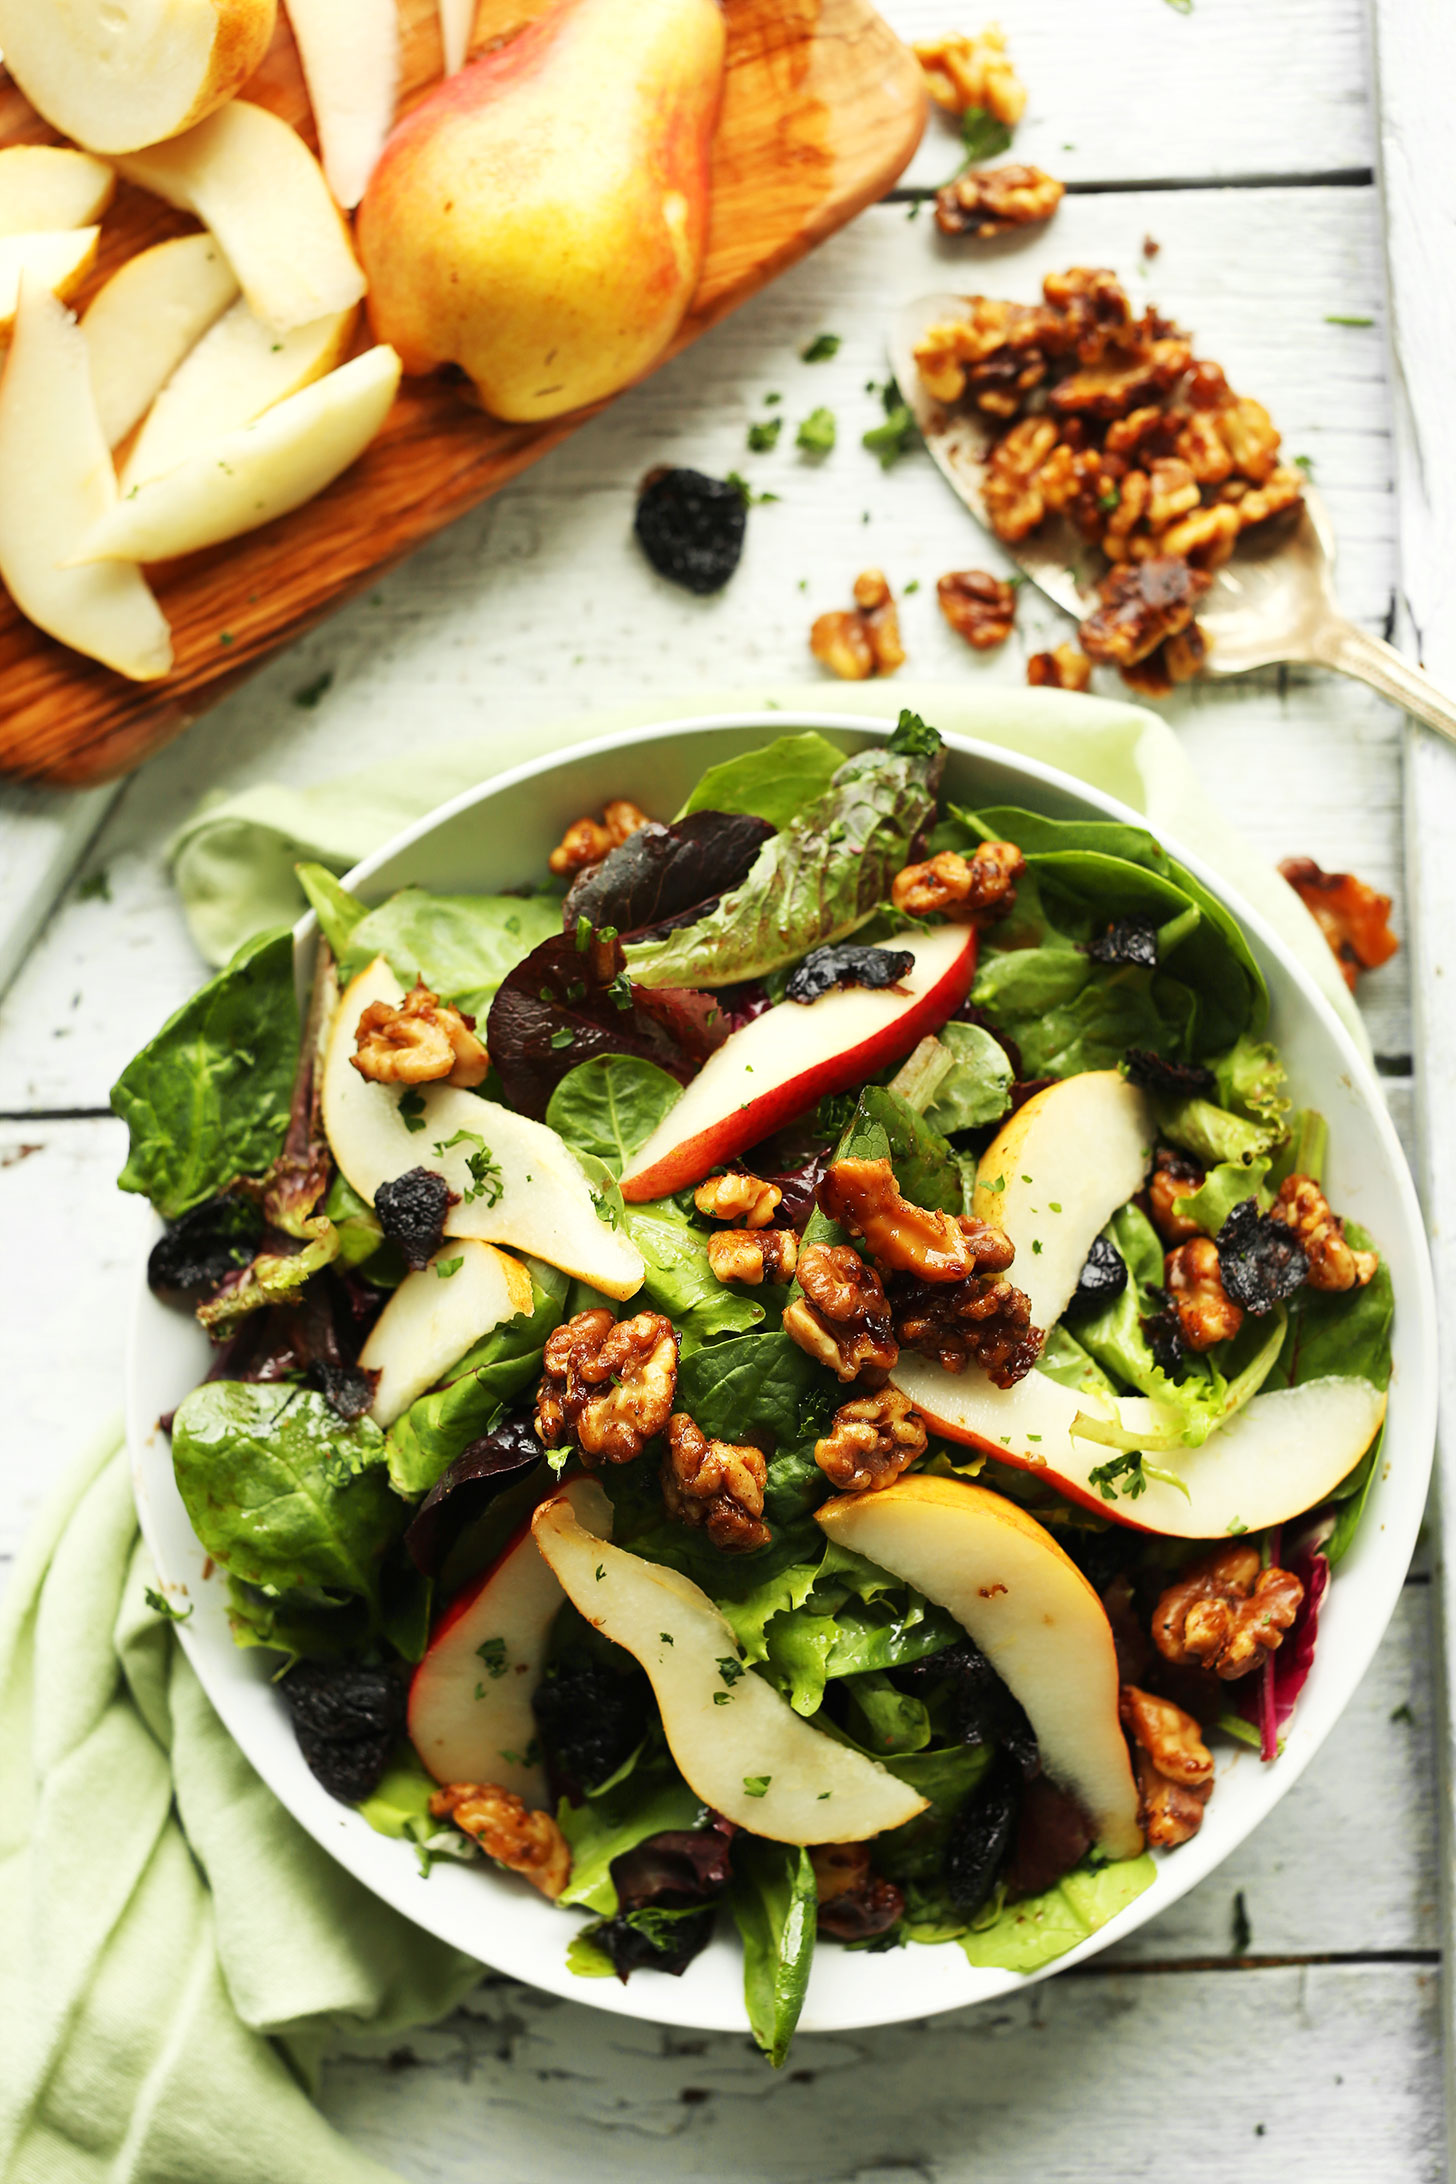 Pear Salad with Dried Cherries and Candied Walnuts